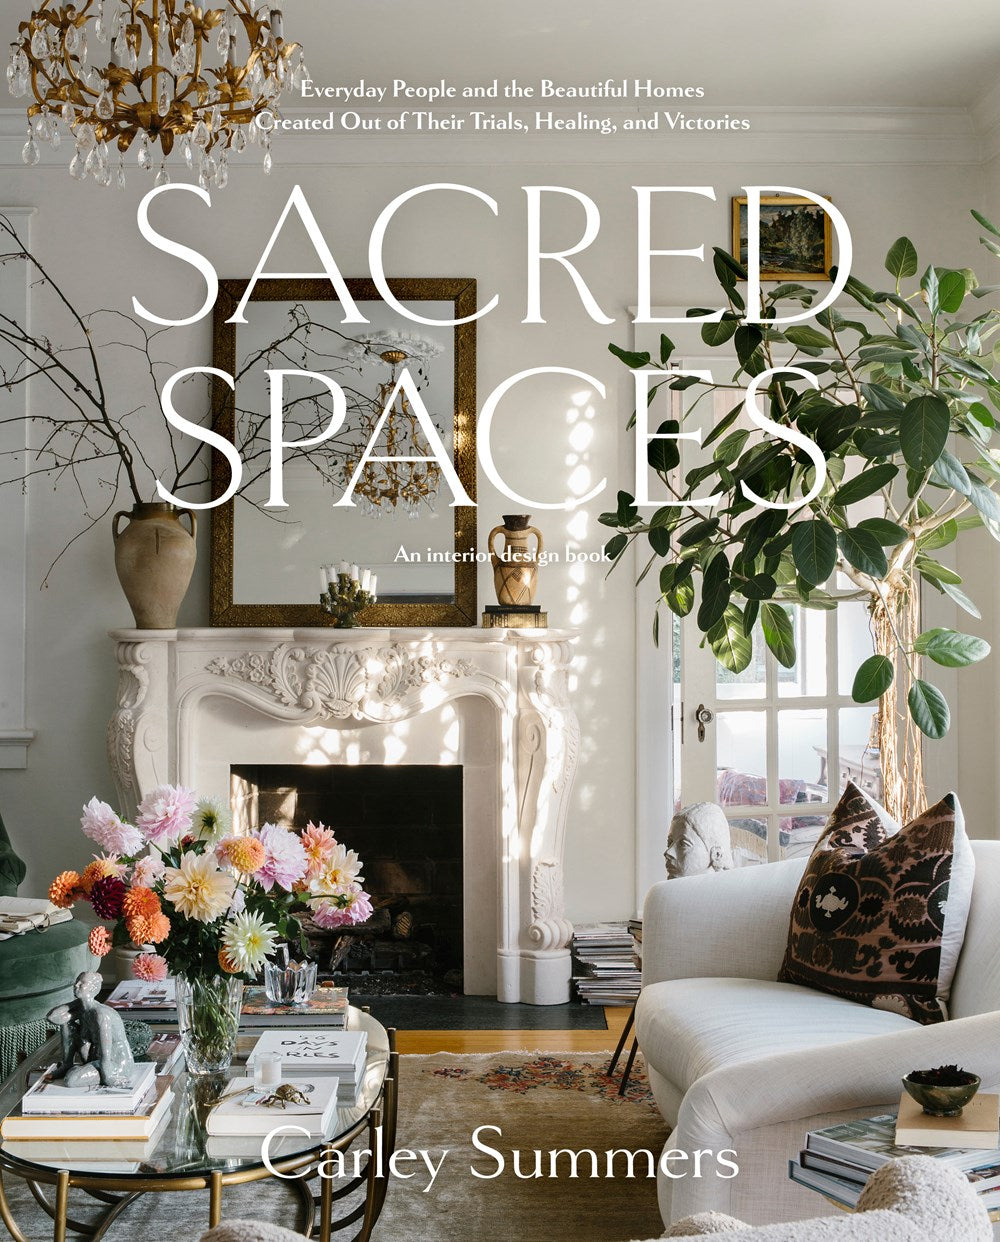 Sacred Spaces: Everyday People and the Beautiful Homes Created Out of Their Trials, Healing and Victories by Carley Summers